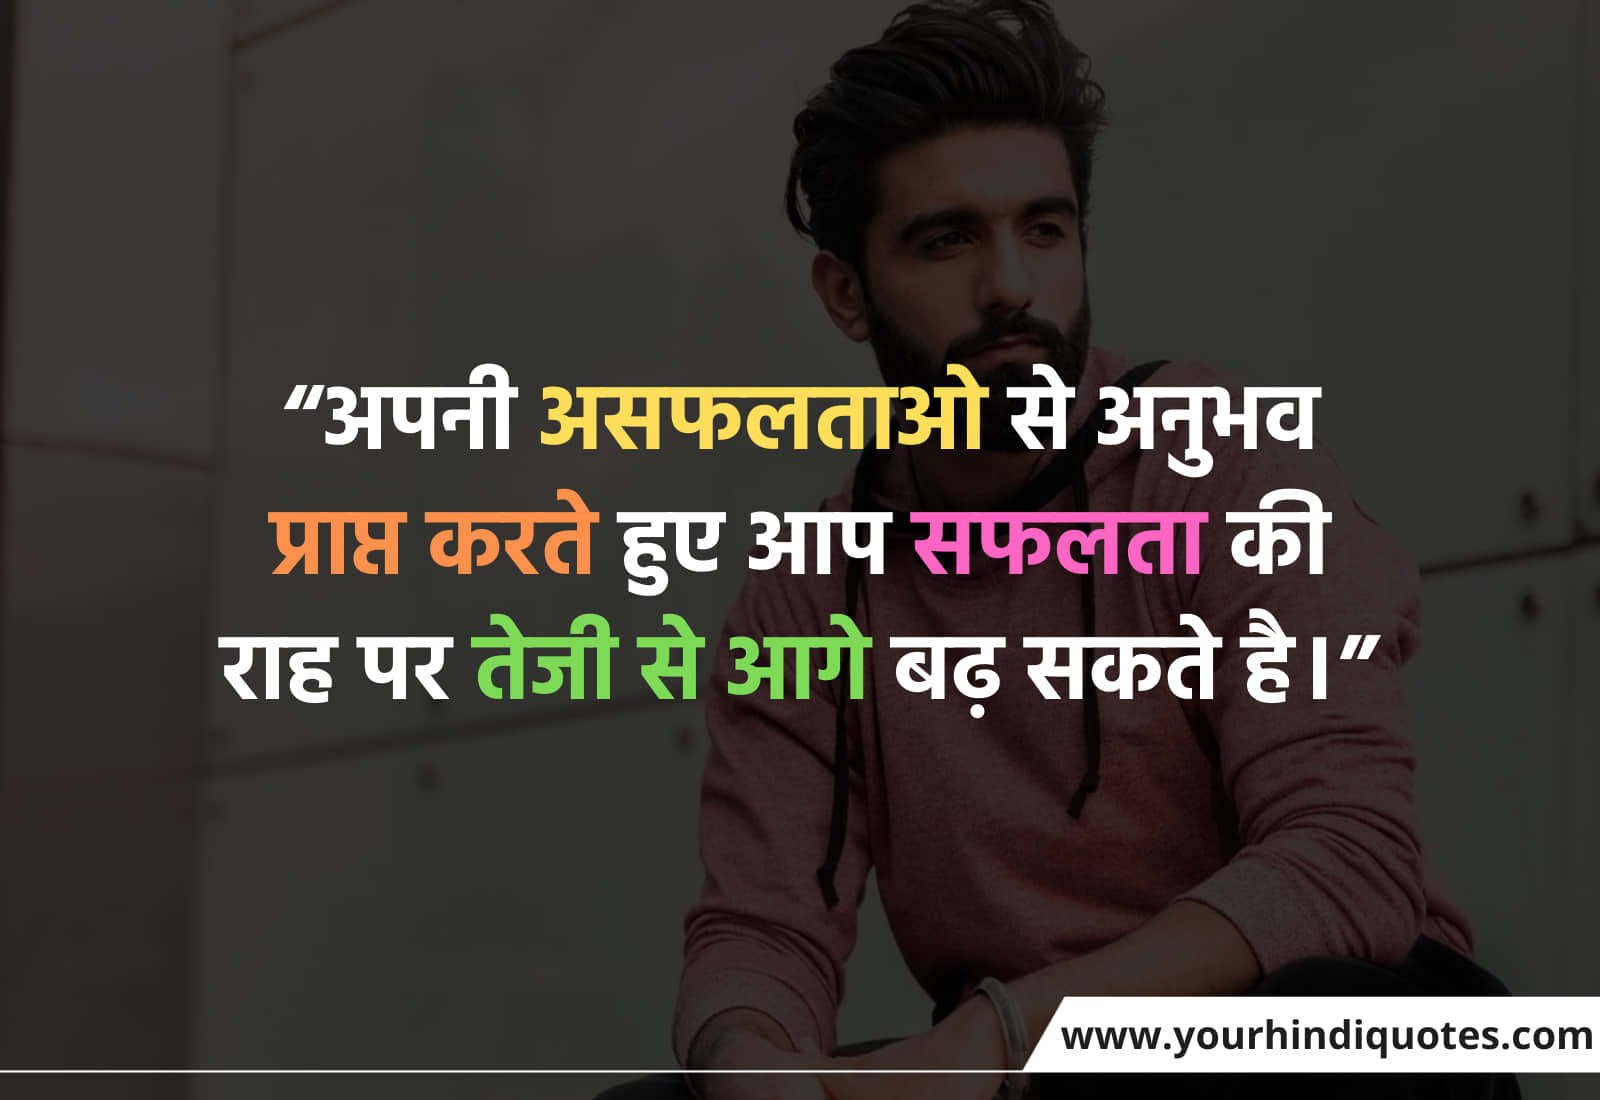 Best Life Quotes In Hindi